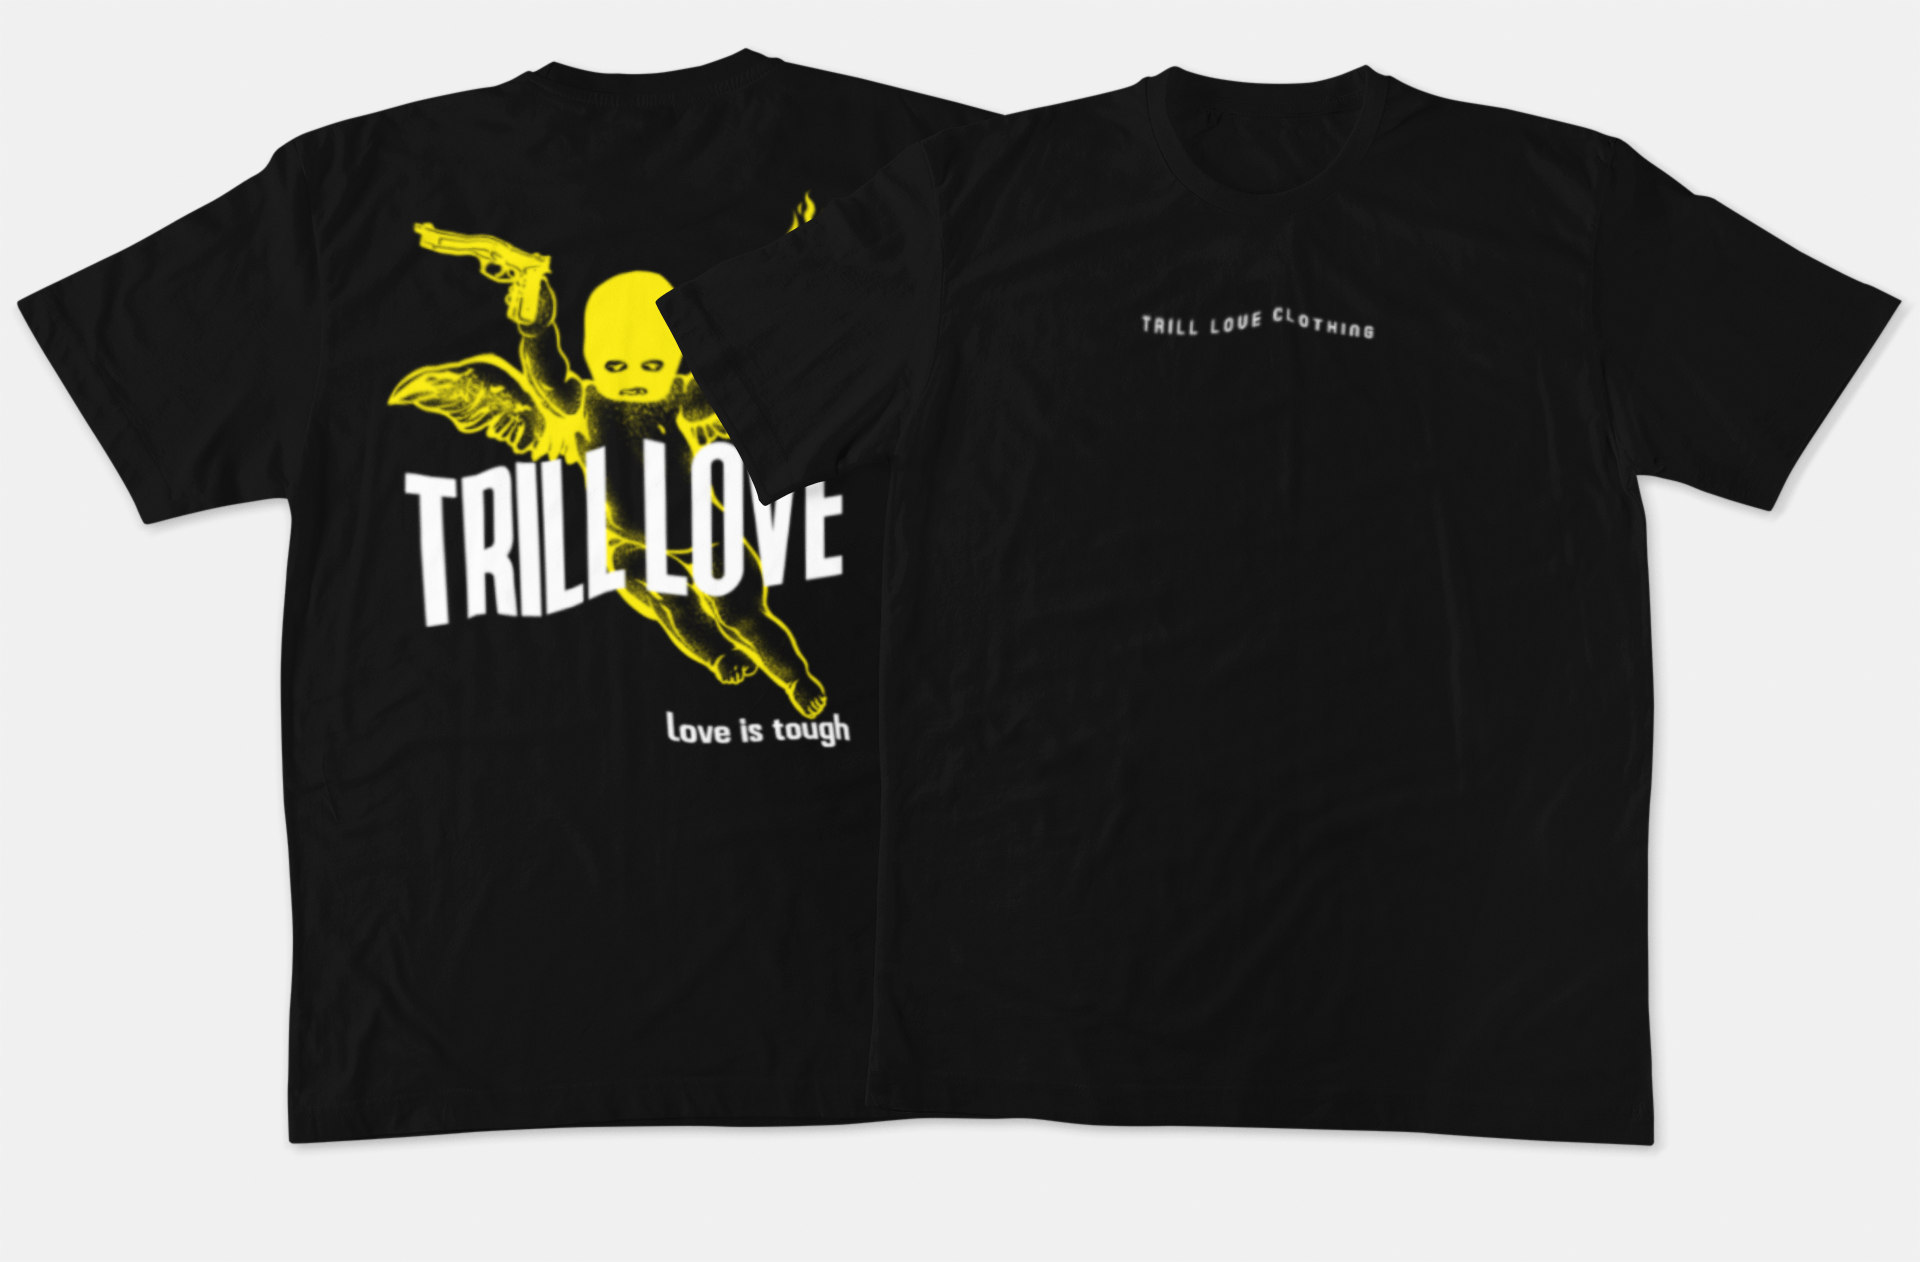 Trill Love x Angel graphic tee